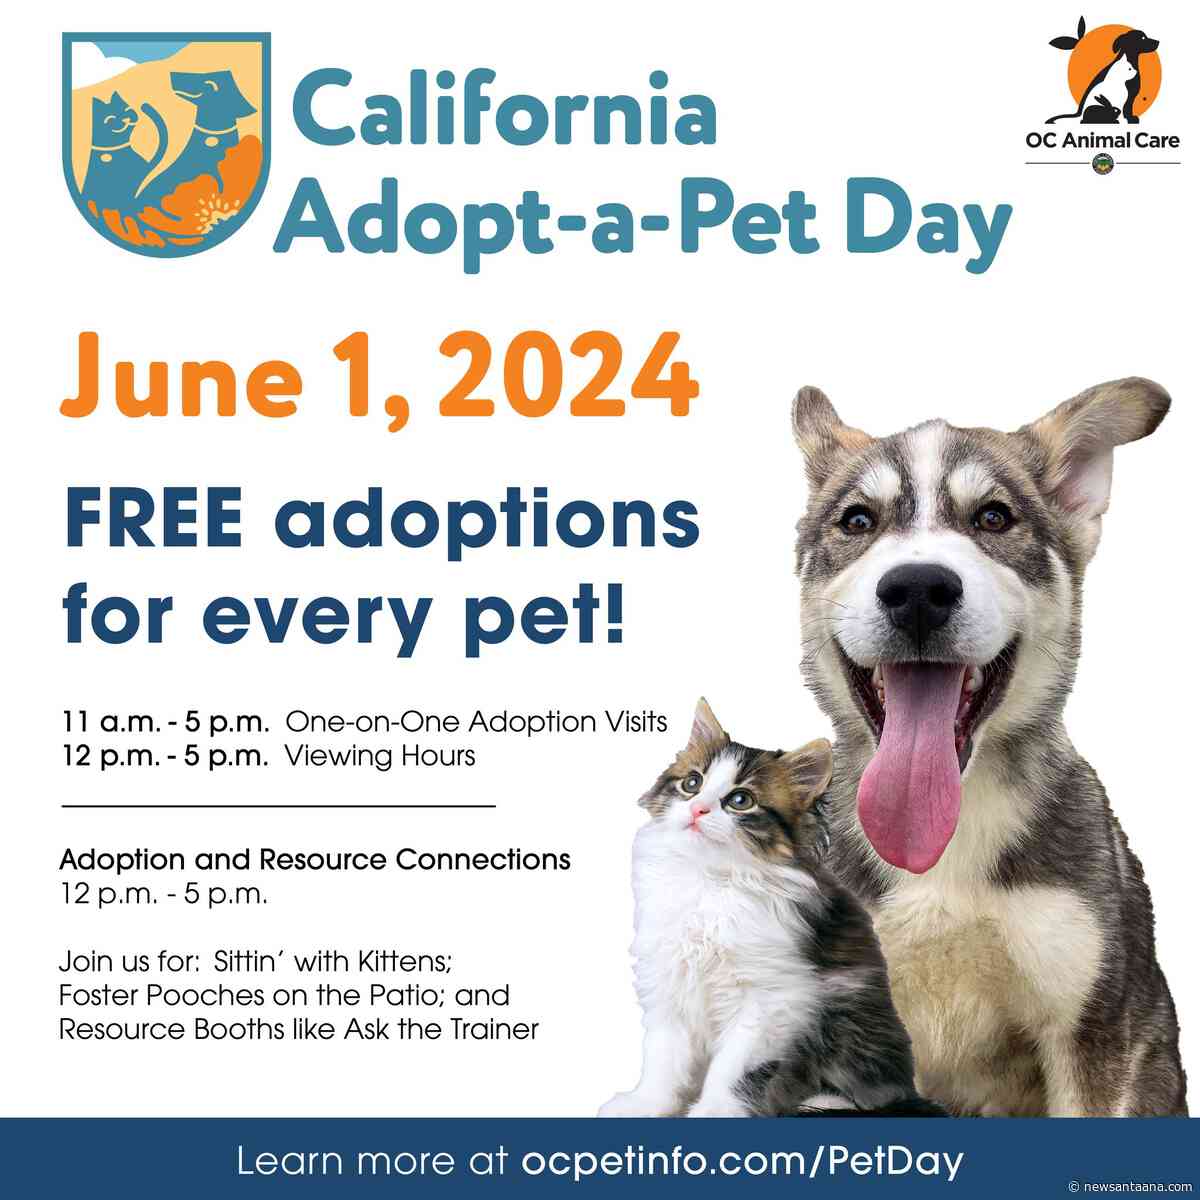 OC Animal Care to offer free pet adoptions on California Adopt-a-Pet Day this Saturday